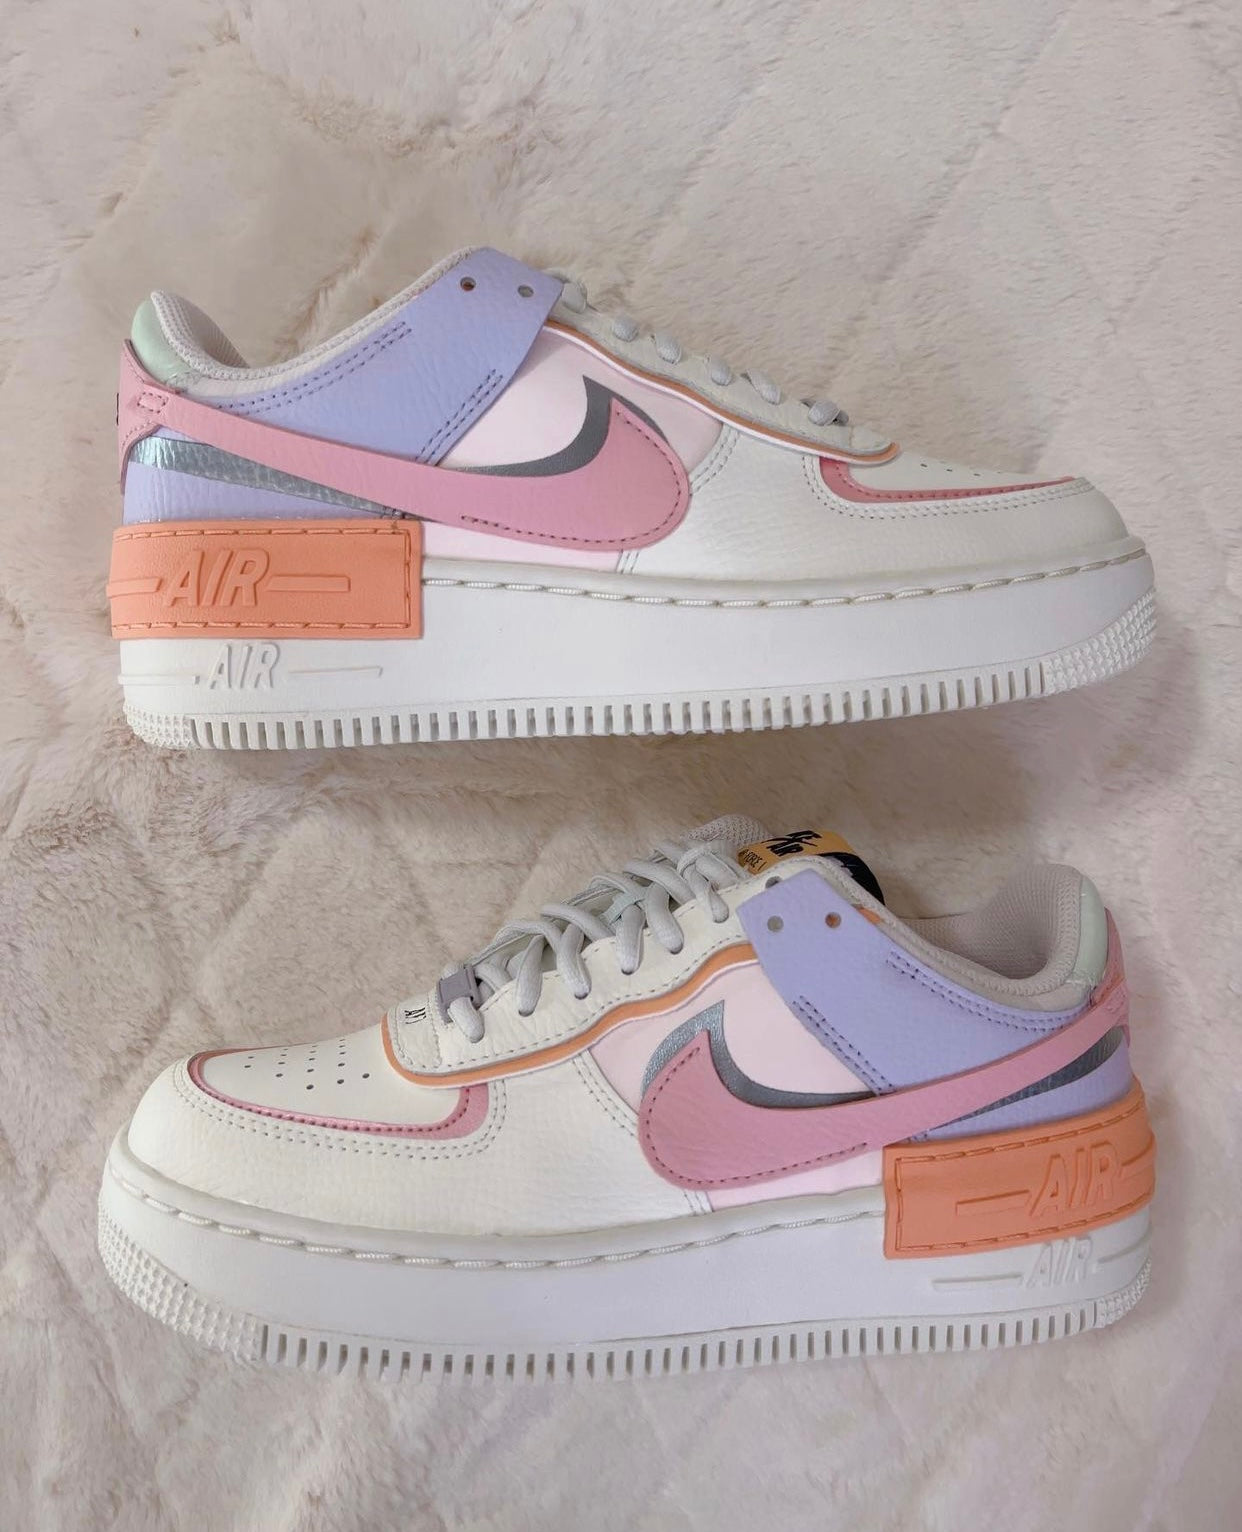 Nike Air Force 1 Shadow Women’s Sneakers Sail/Pink Glaze, Size 8